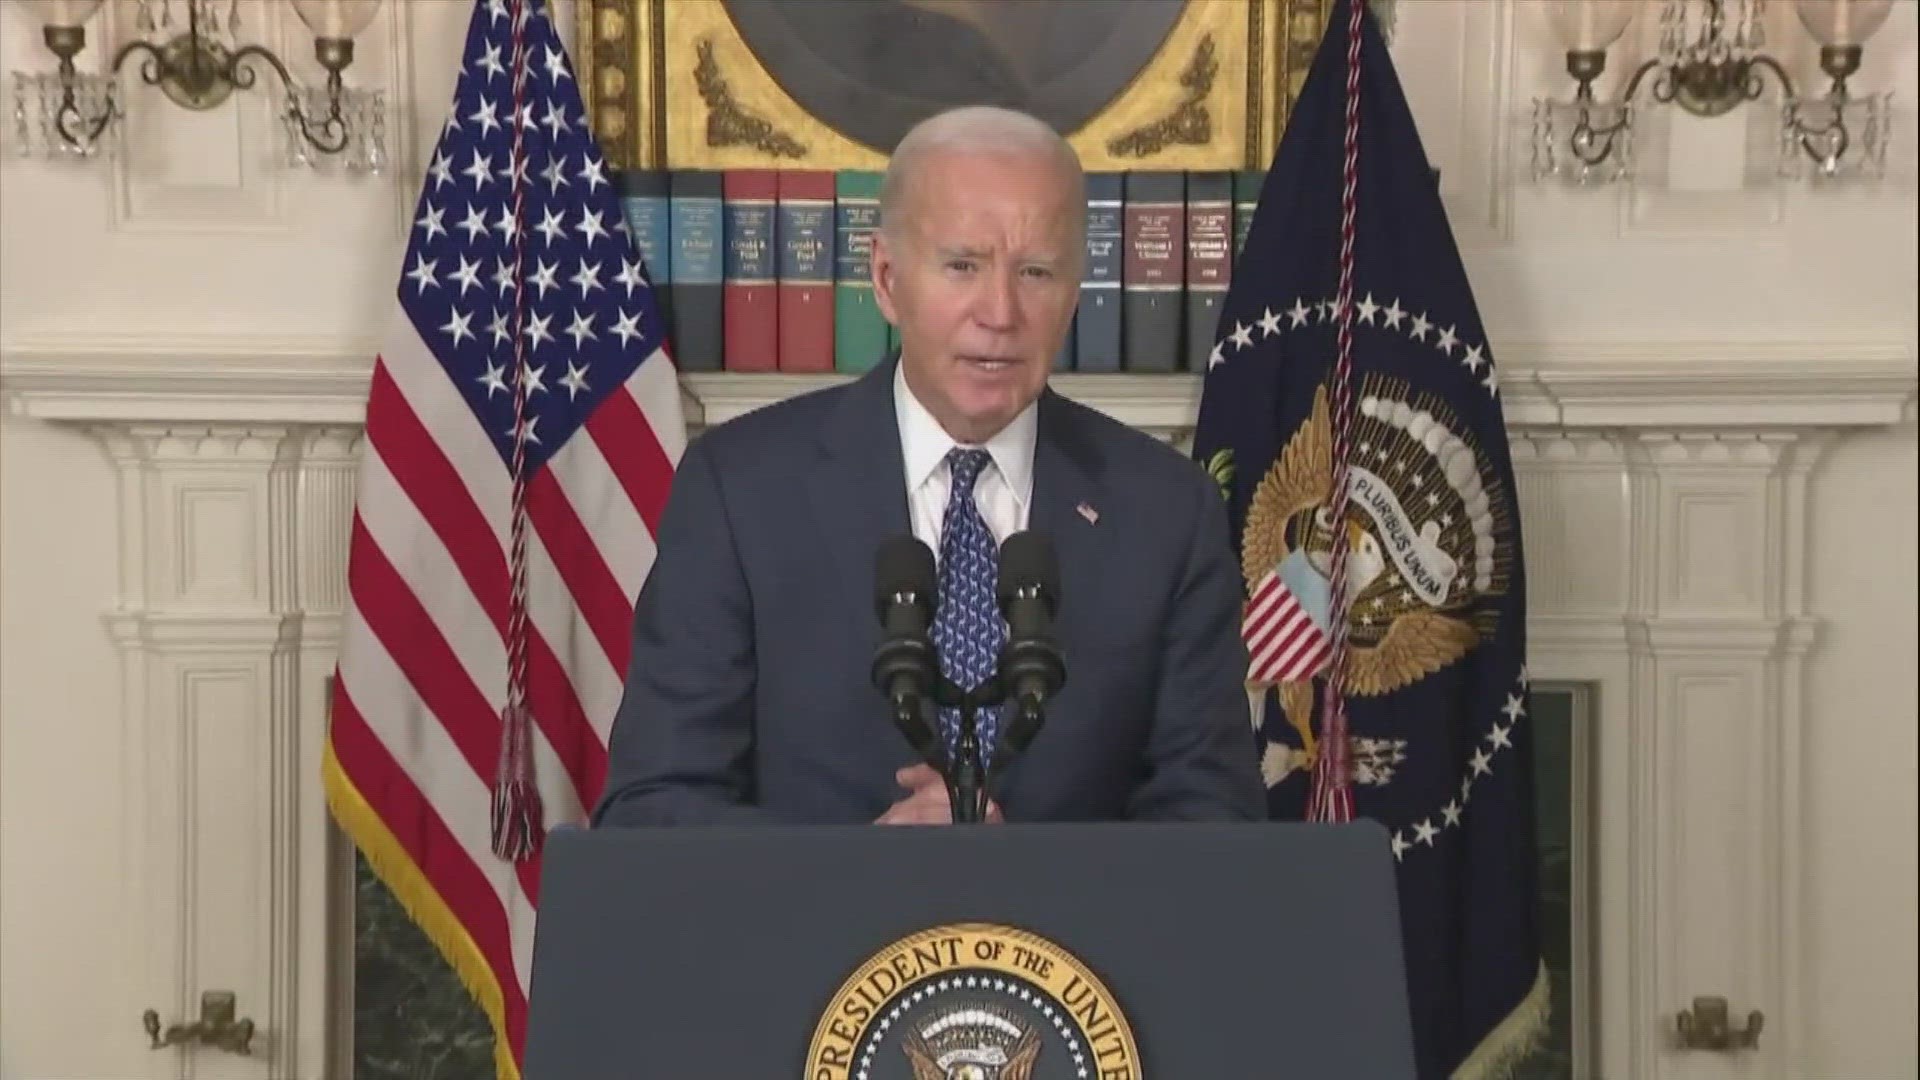 Biden insisted he remained the only qualified person to be president.